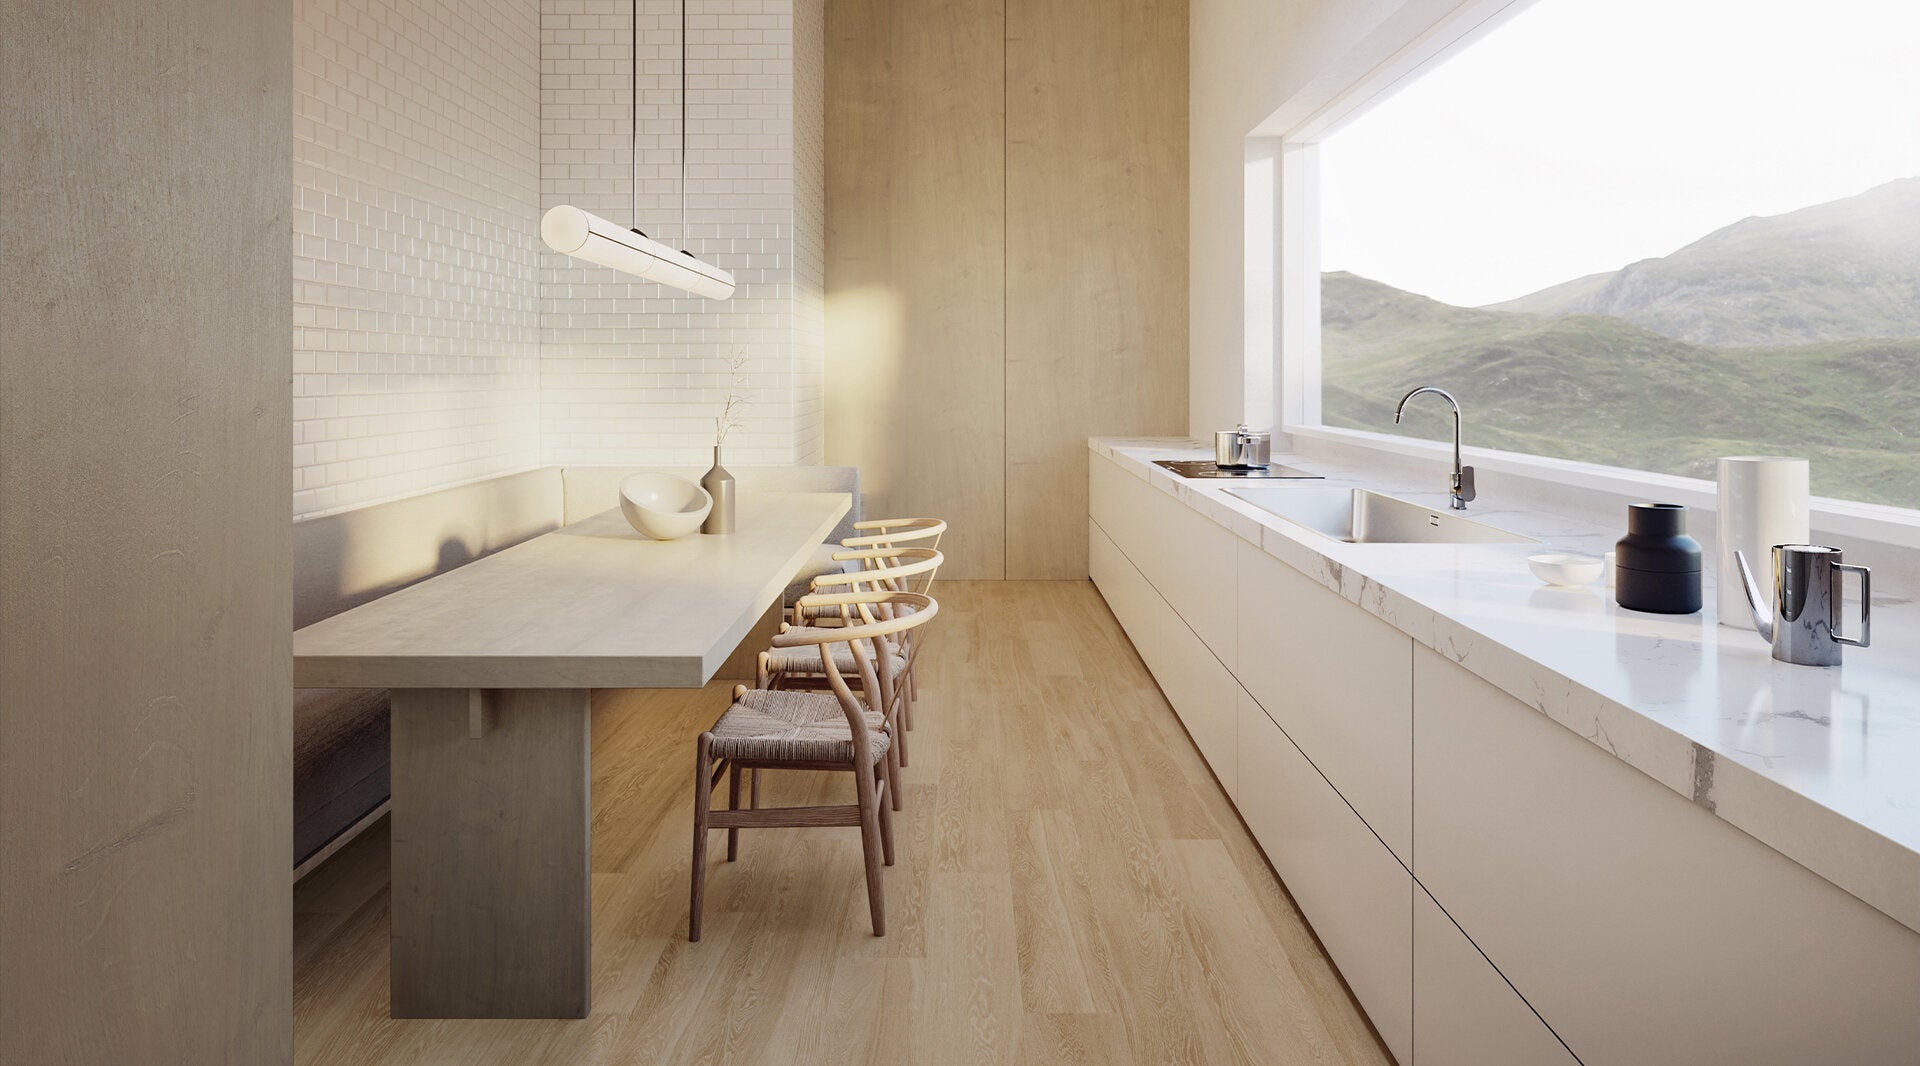 Modern minimalist kitchen with Anatolia Aspen Paper Birch porcelain tile collection, showcasing light wood-look tiles on floor and walls with natural light